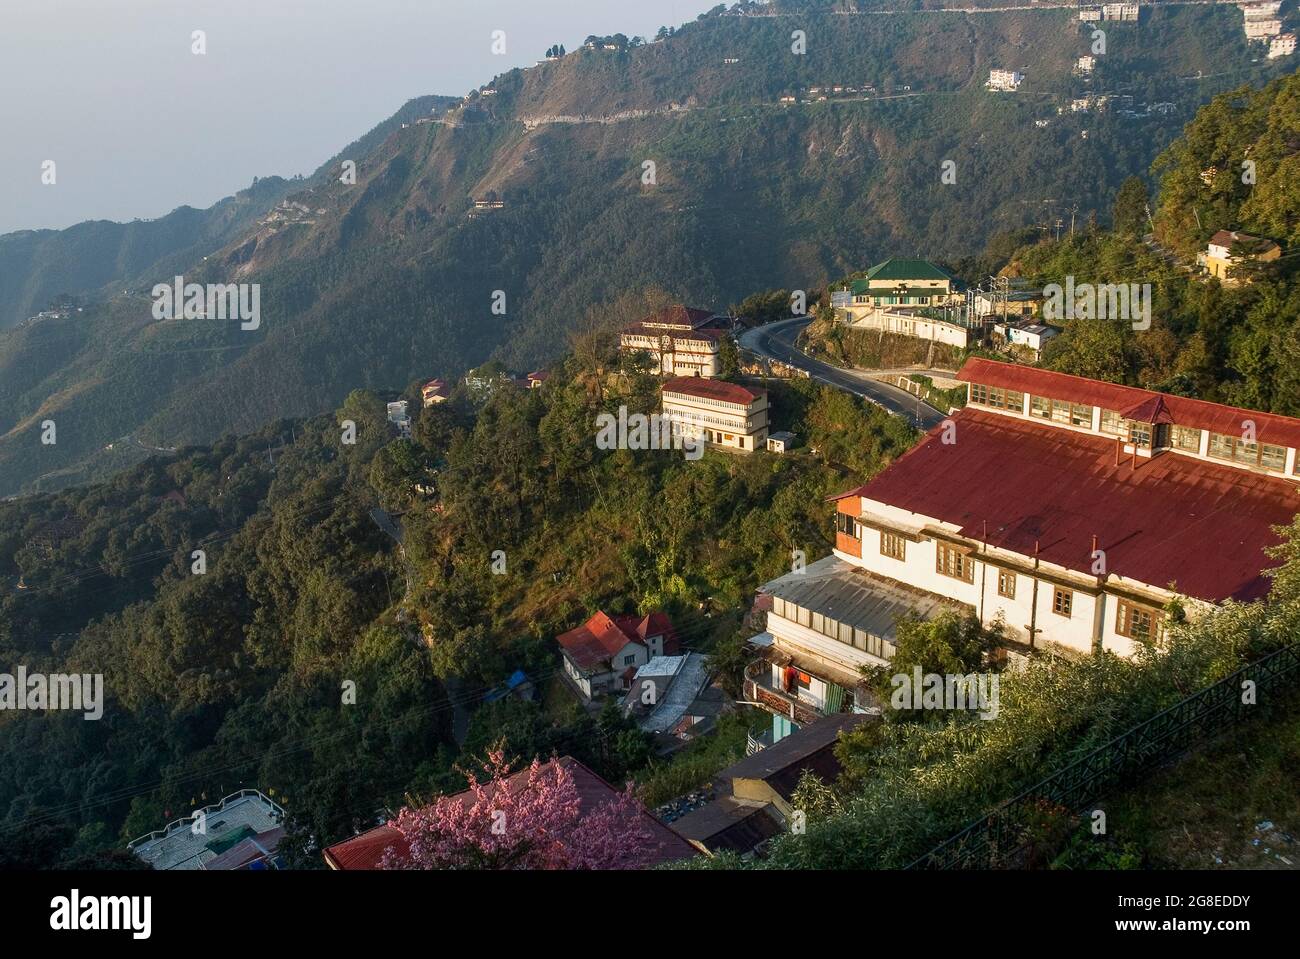 Early morning in Mussoorie hill station, Uttarakhand State, northern India Stock Photo